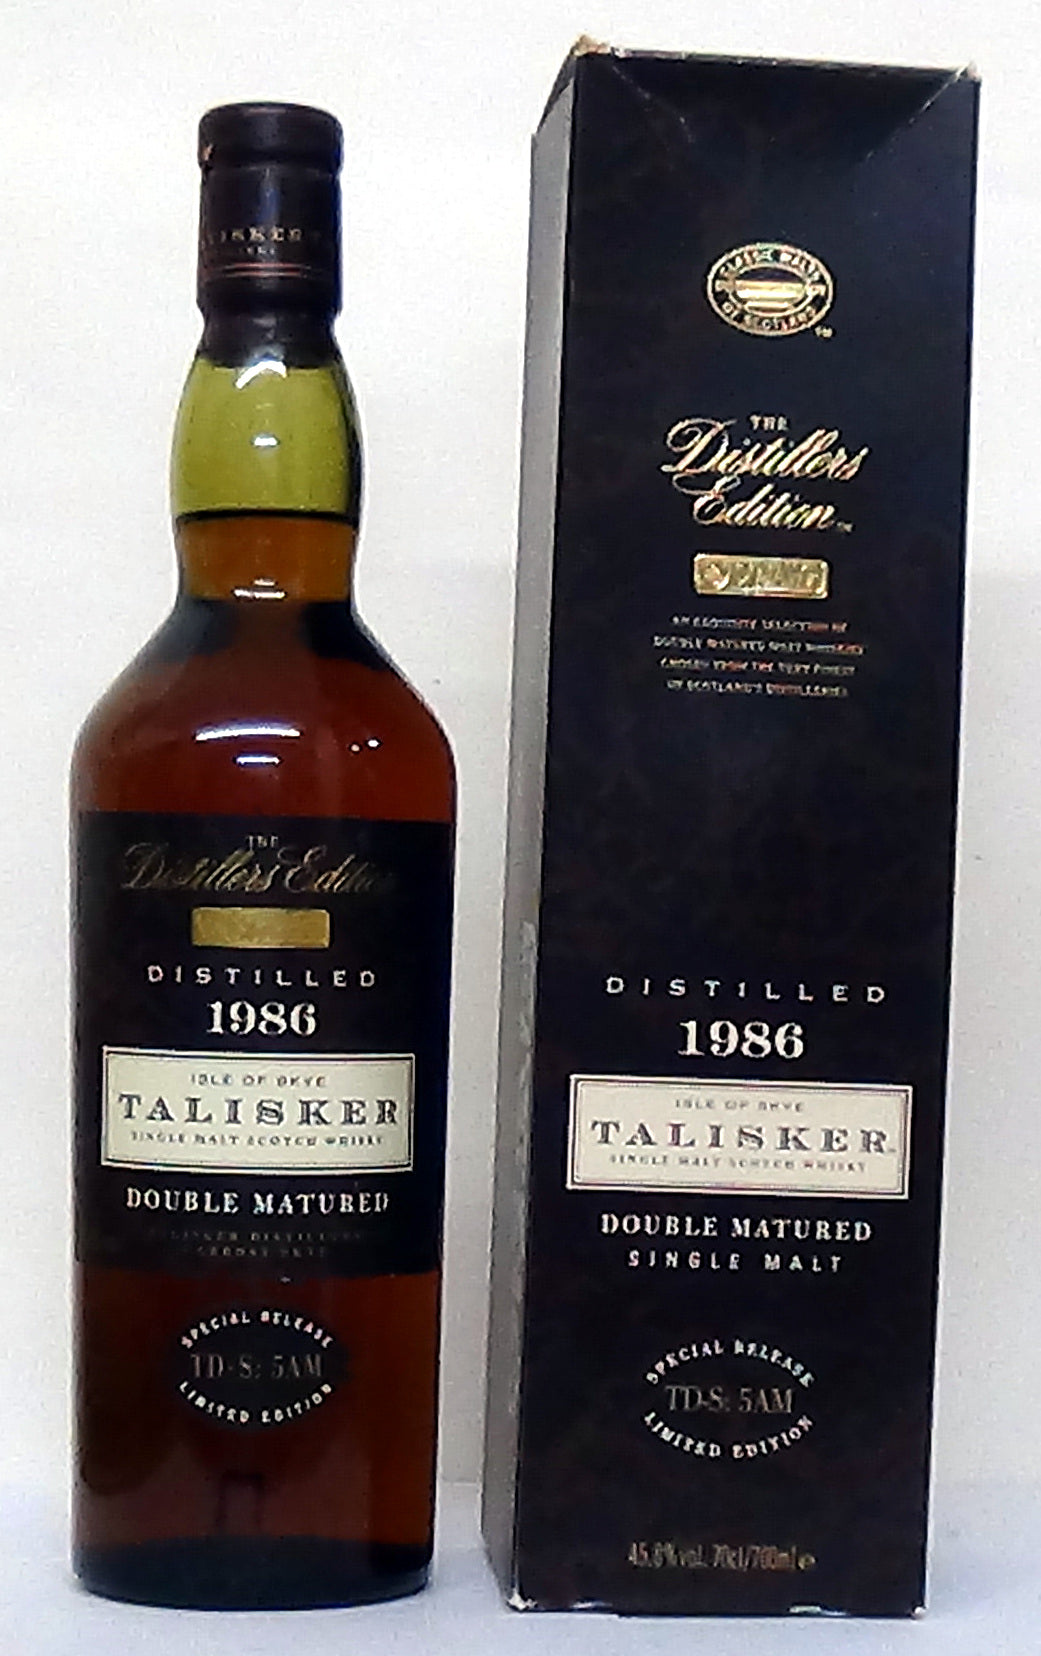 Talisker Double Matured, The Distillers Edition 45.8%Abv